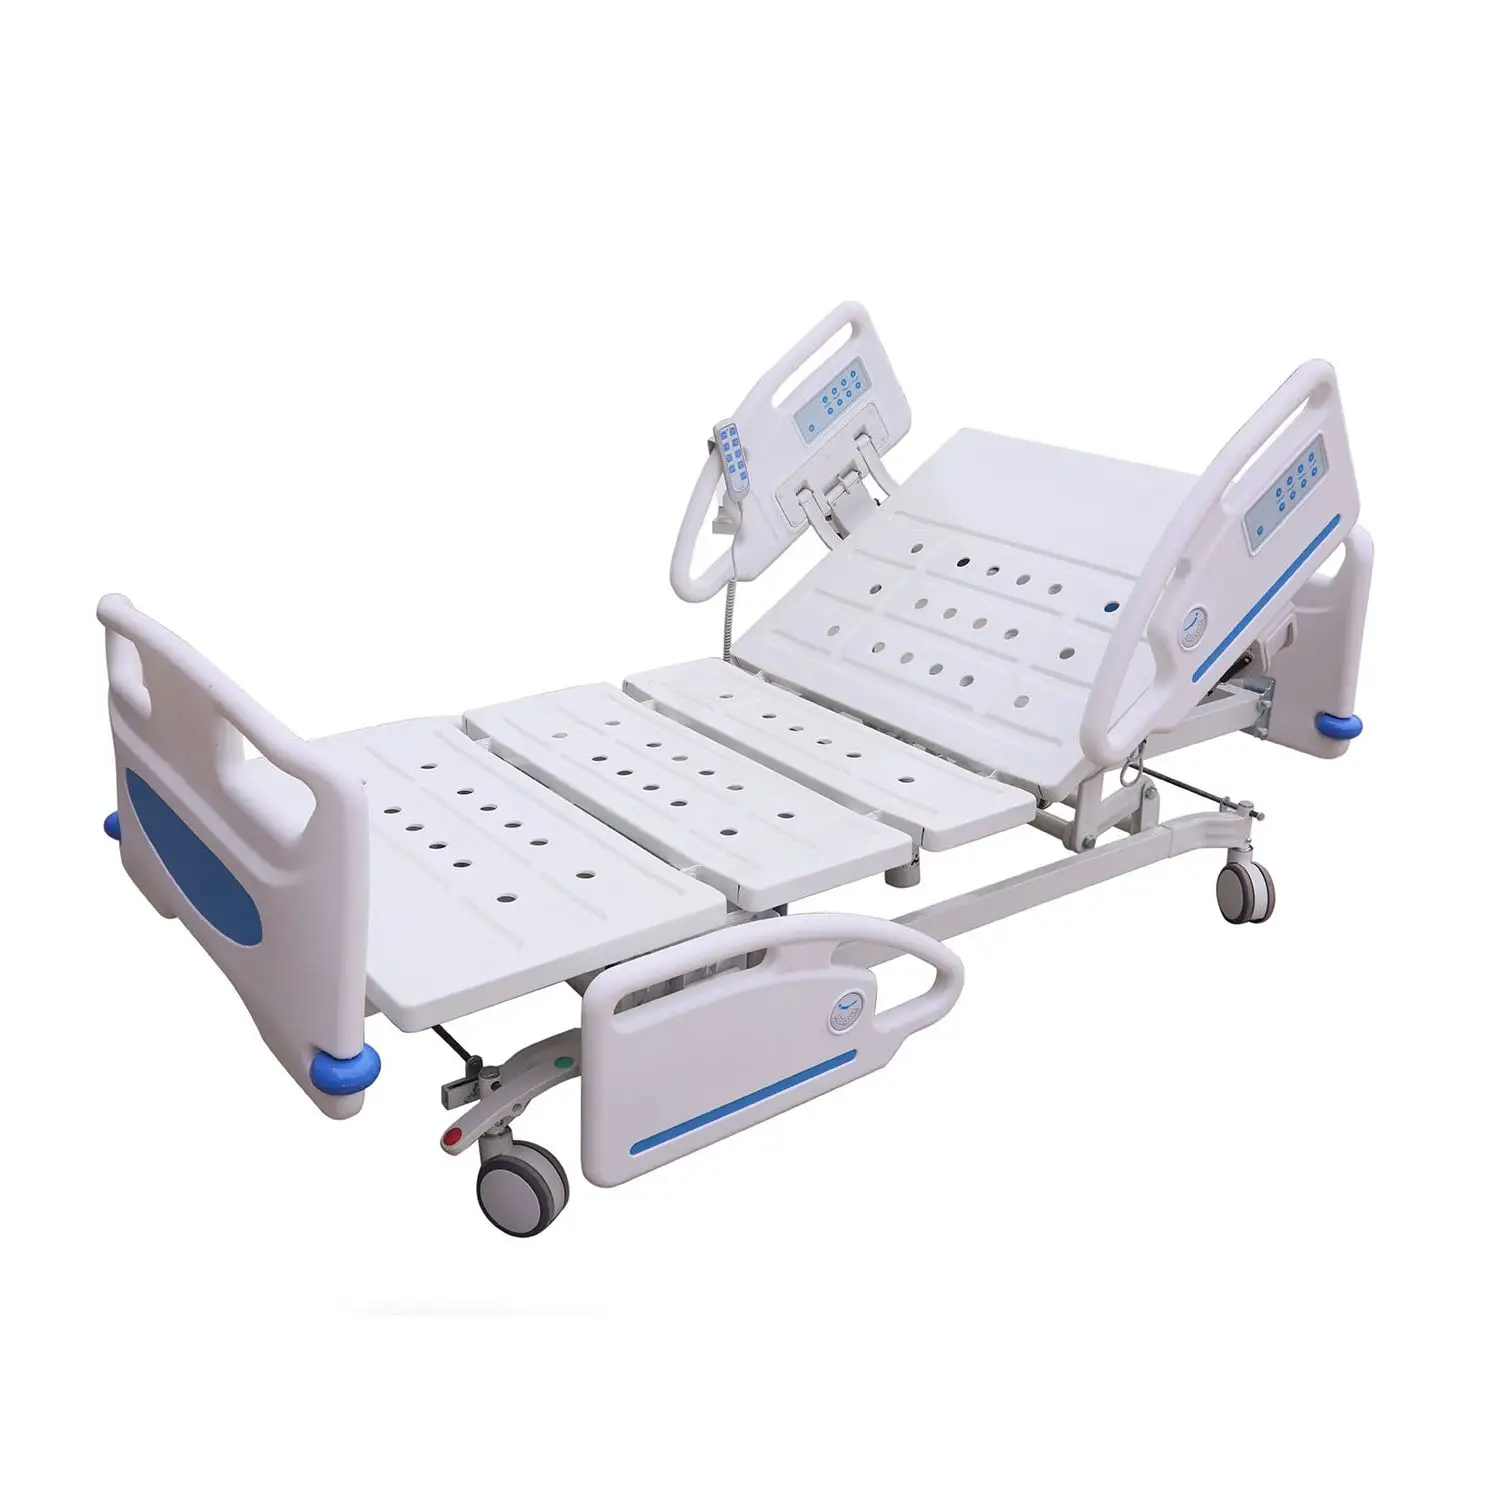 medical equipment hospital bed 3 function hospital electric bed hospital icu bed price